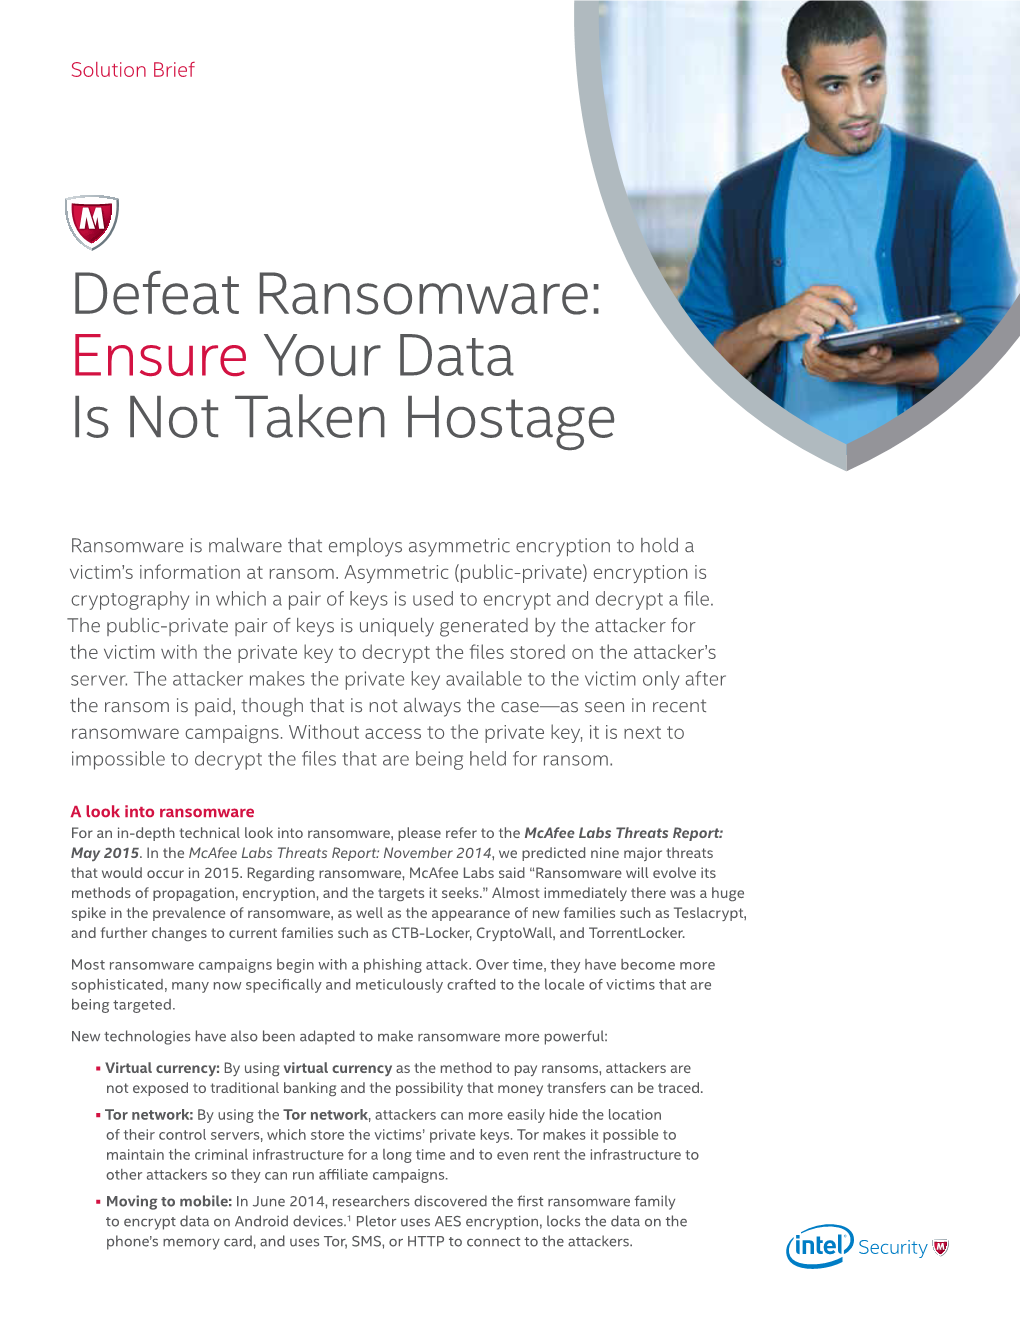 Defeat Ransomware: Ensure Your Data Is Not Taken Hostage